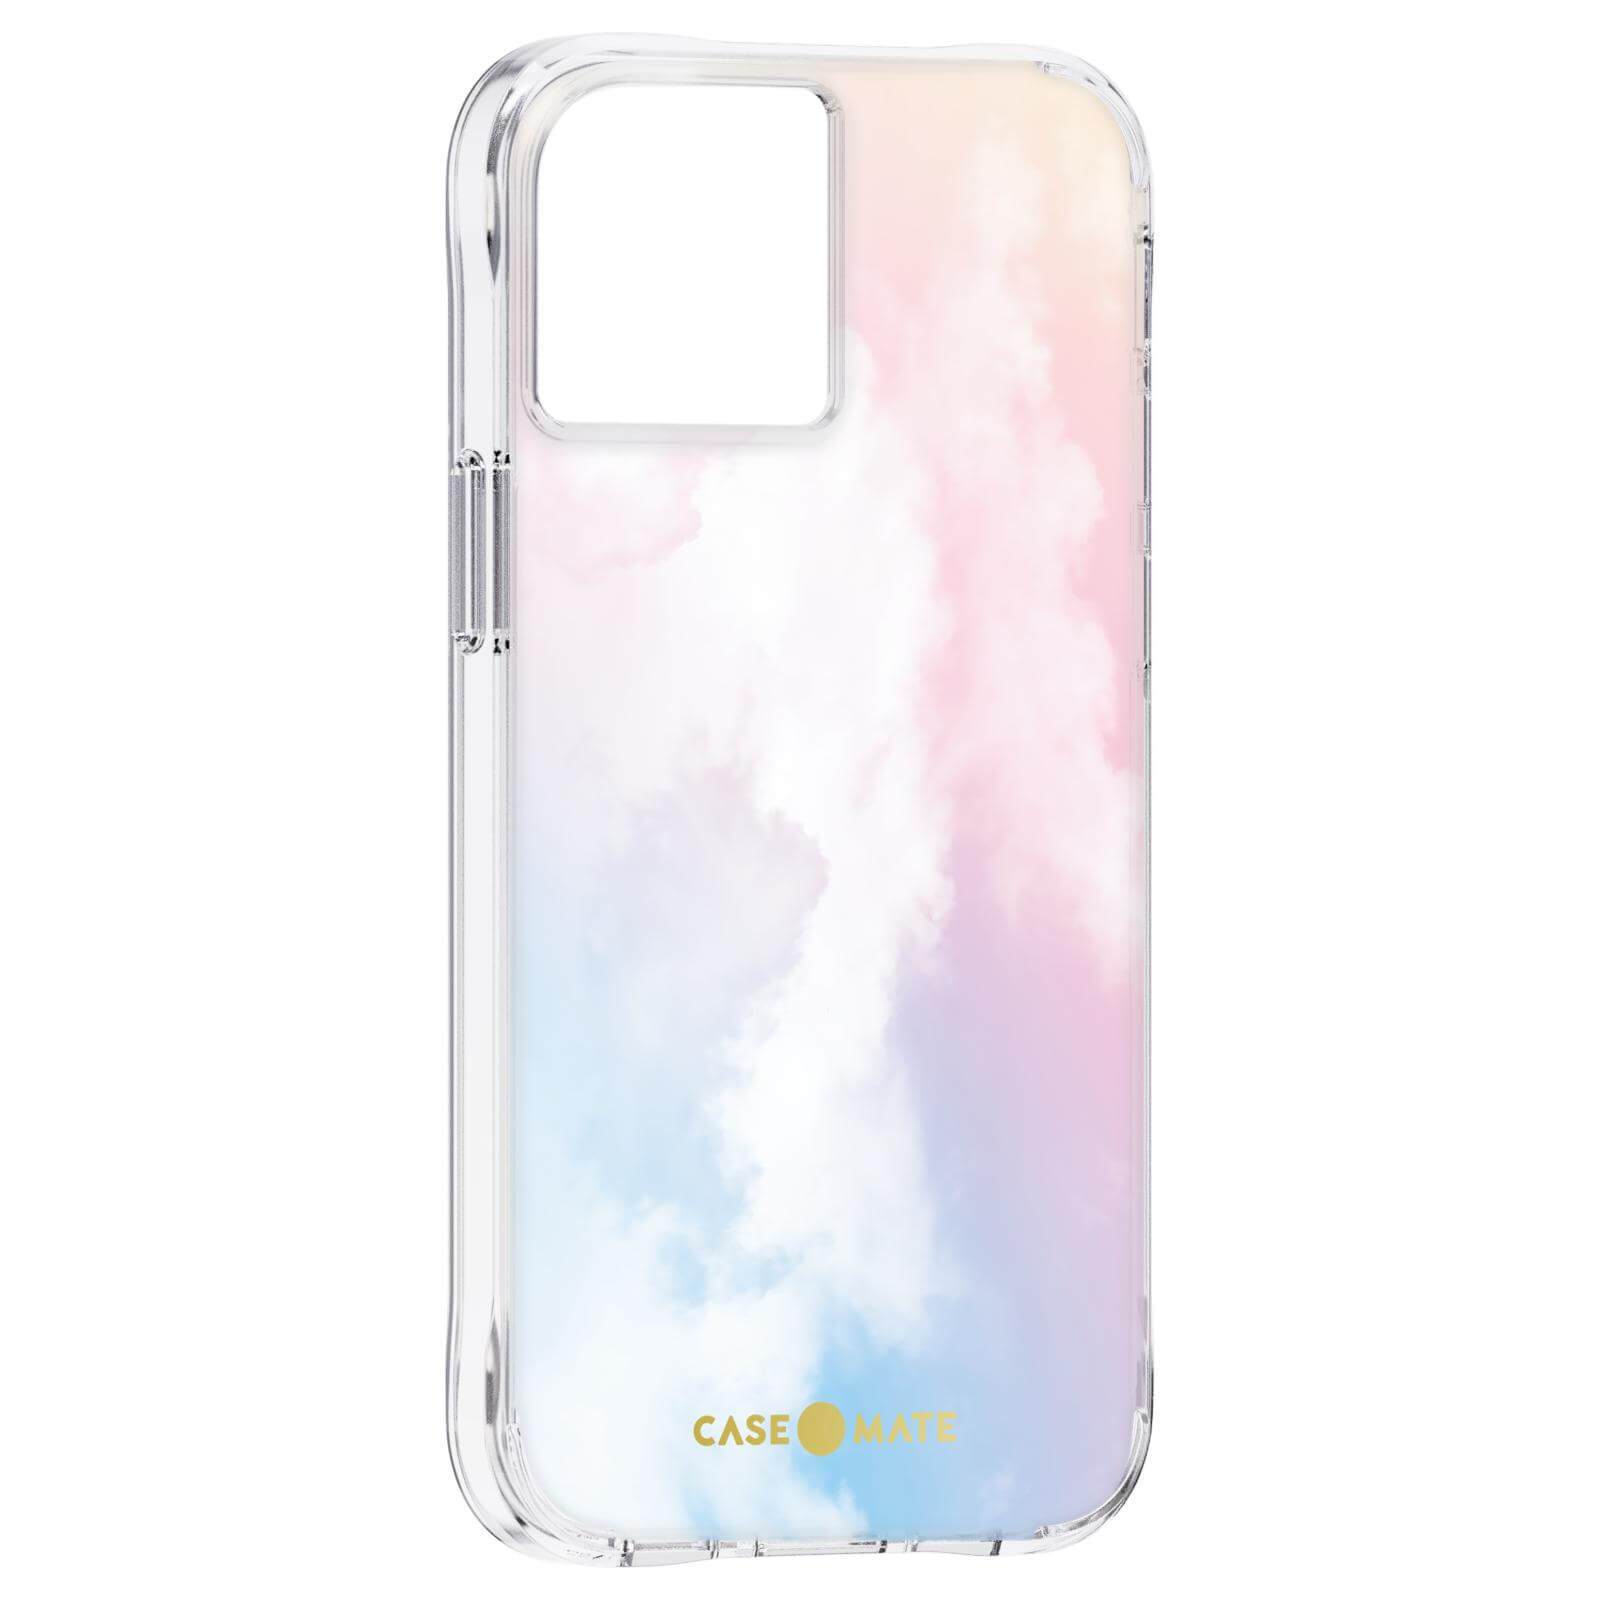 Clouds printed on case for iPhone 13 mini. color::Cloud 9